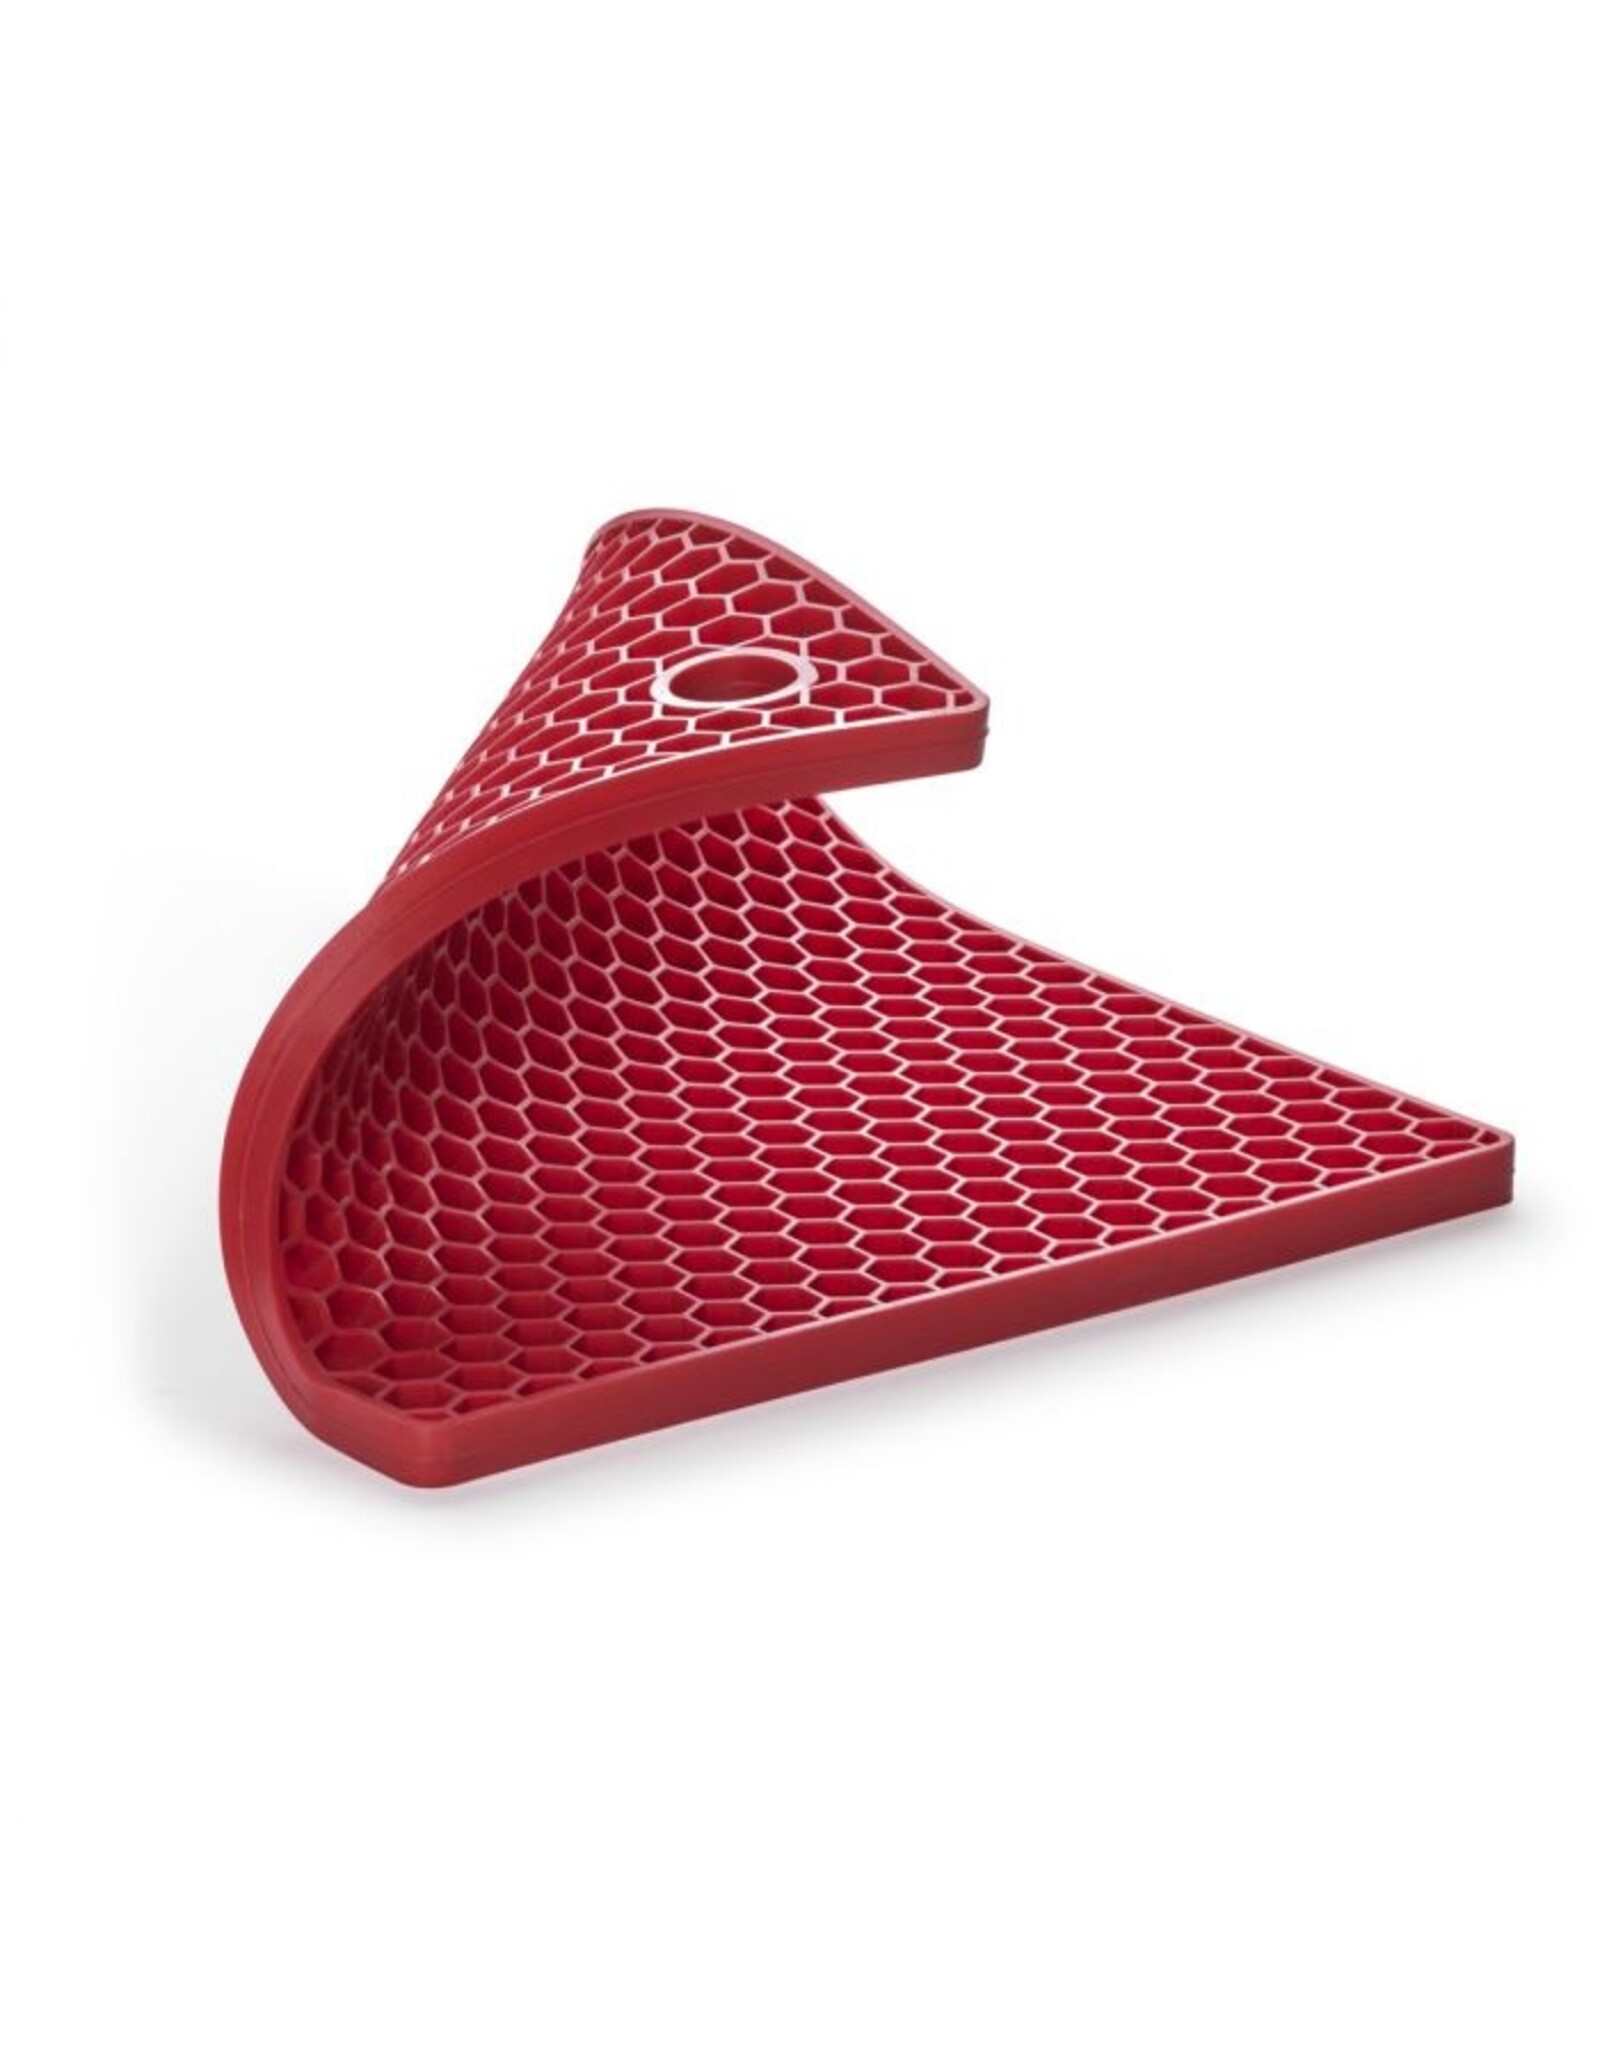 Honeycomb Trivet Red Silicone